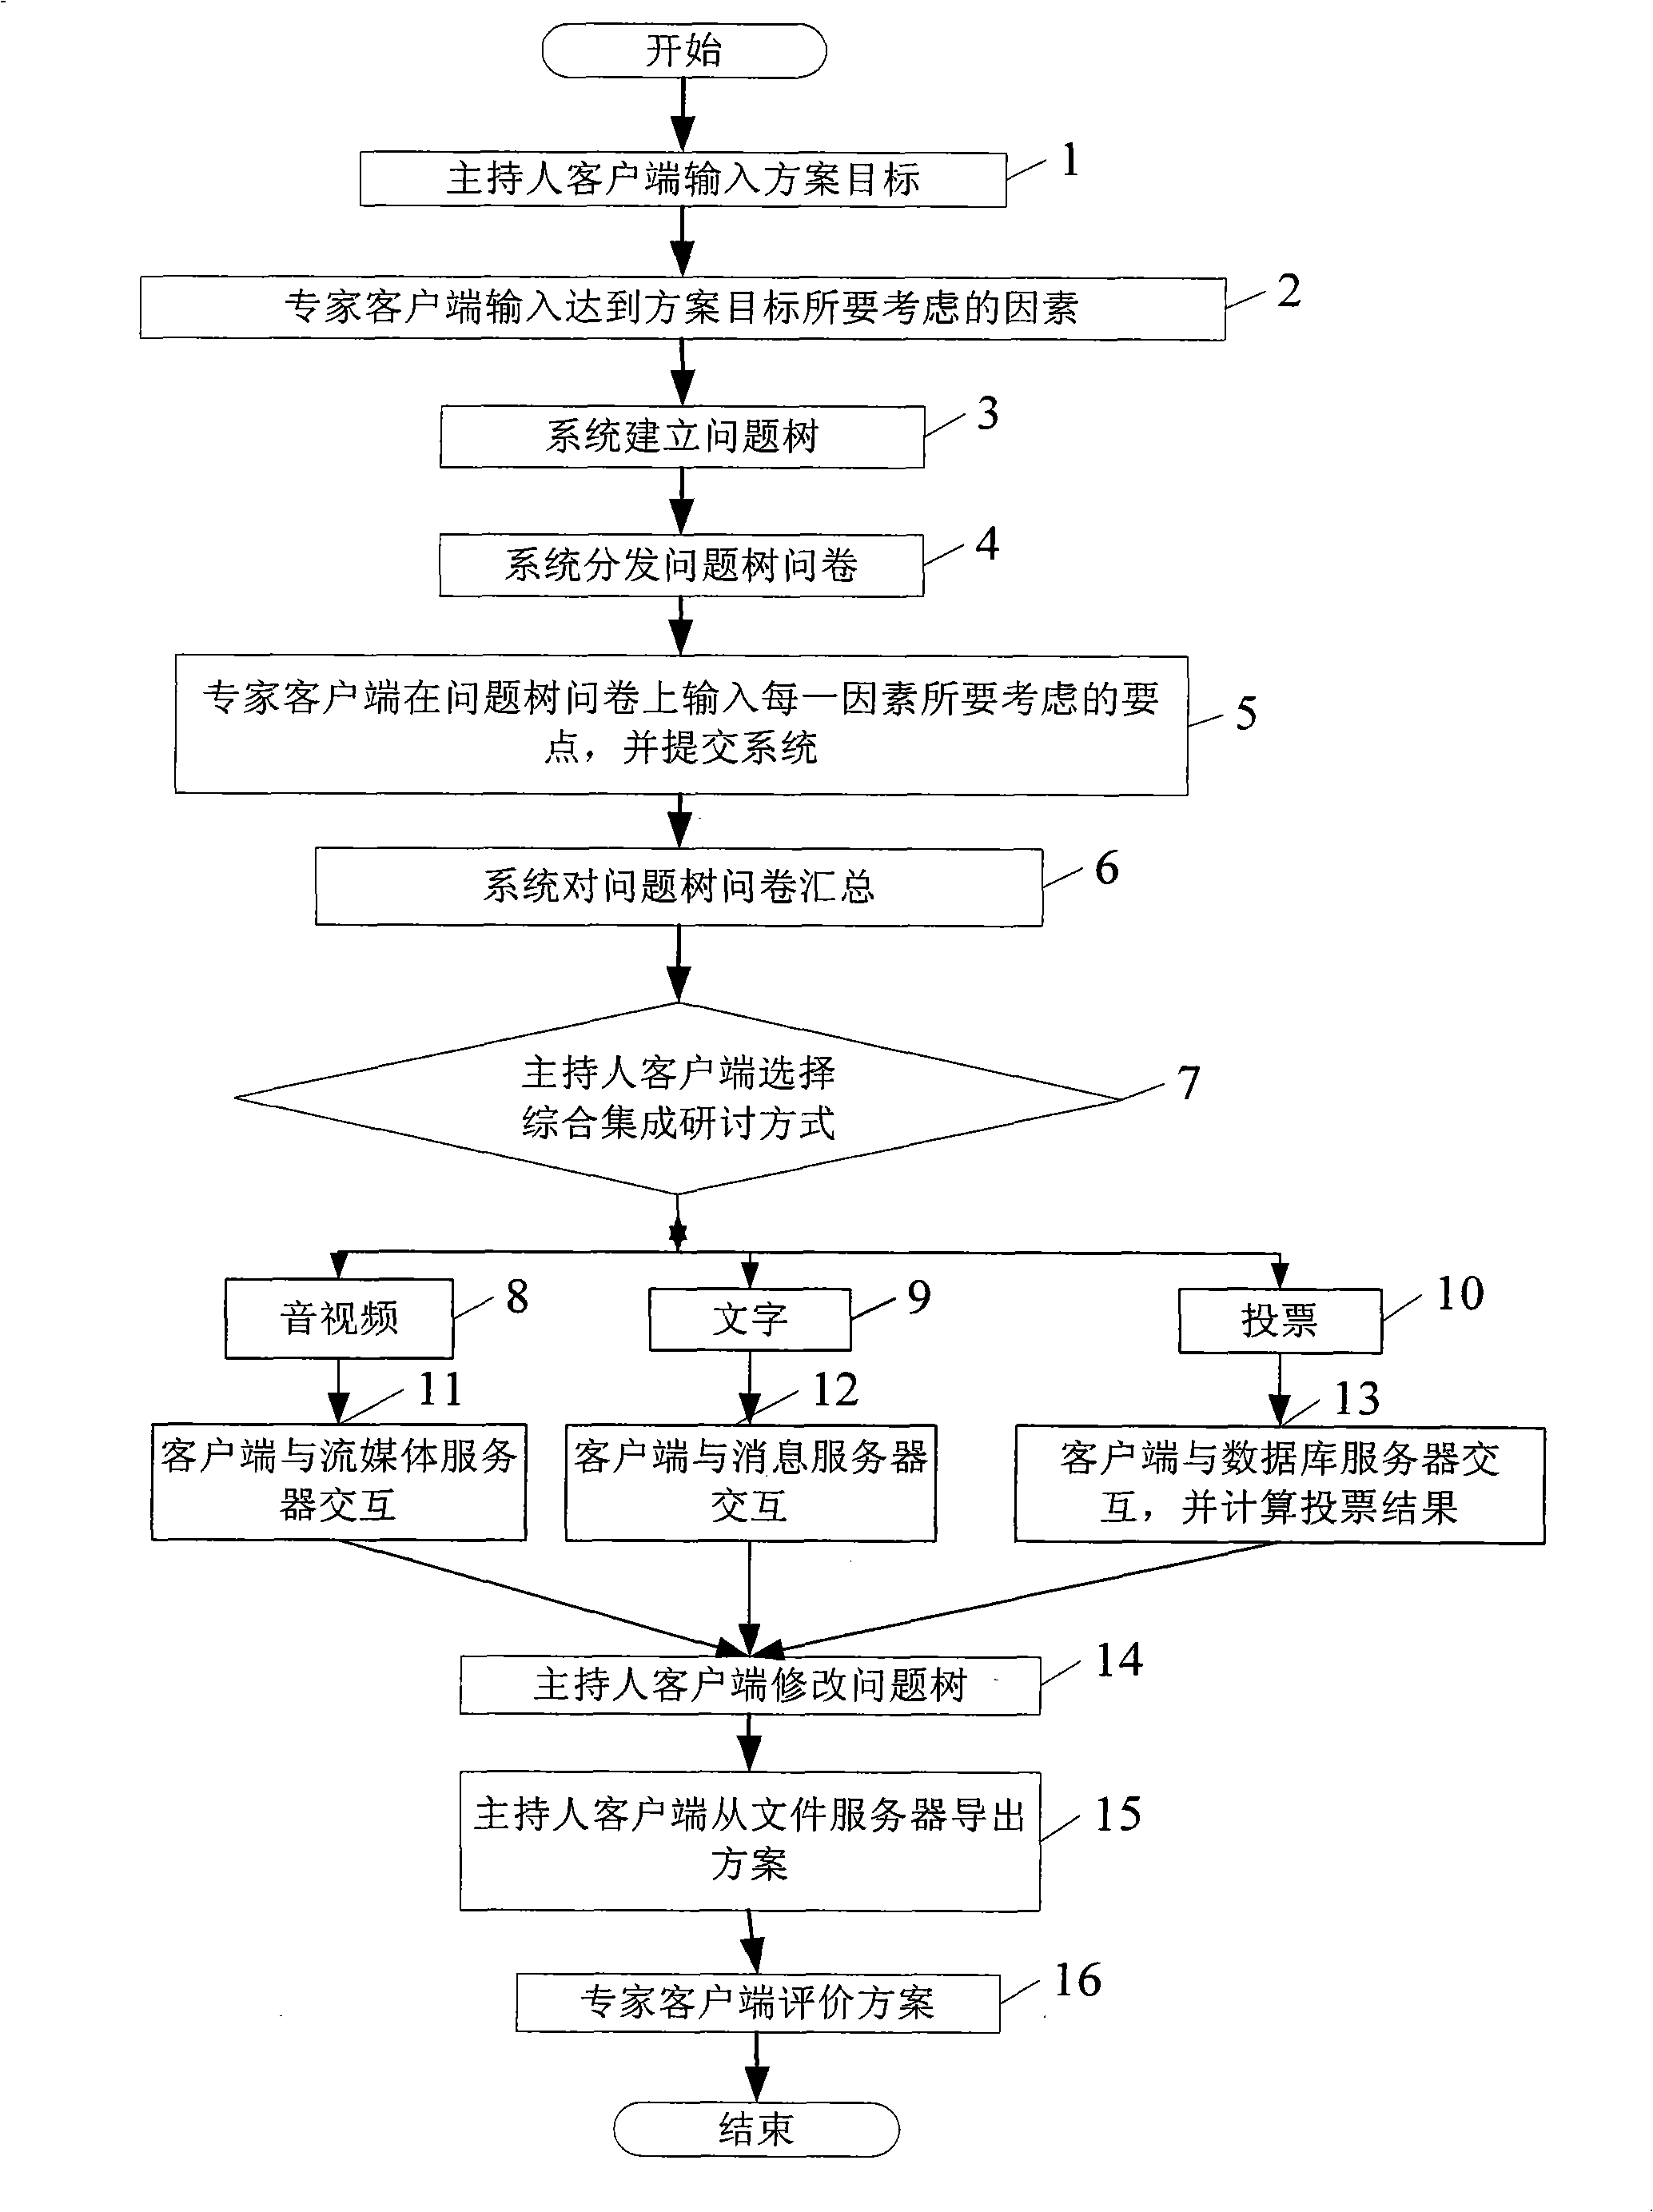 Method and system for composing group decision plan based on question disintegration